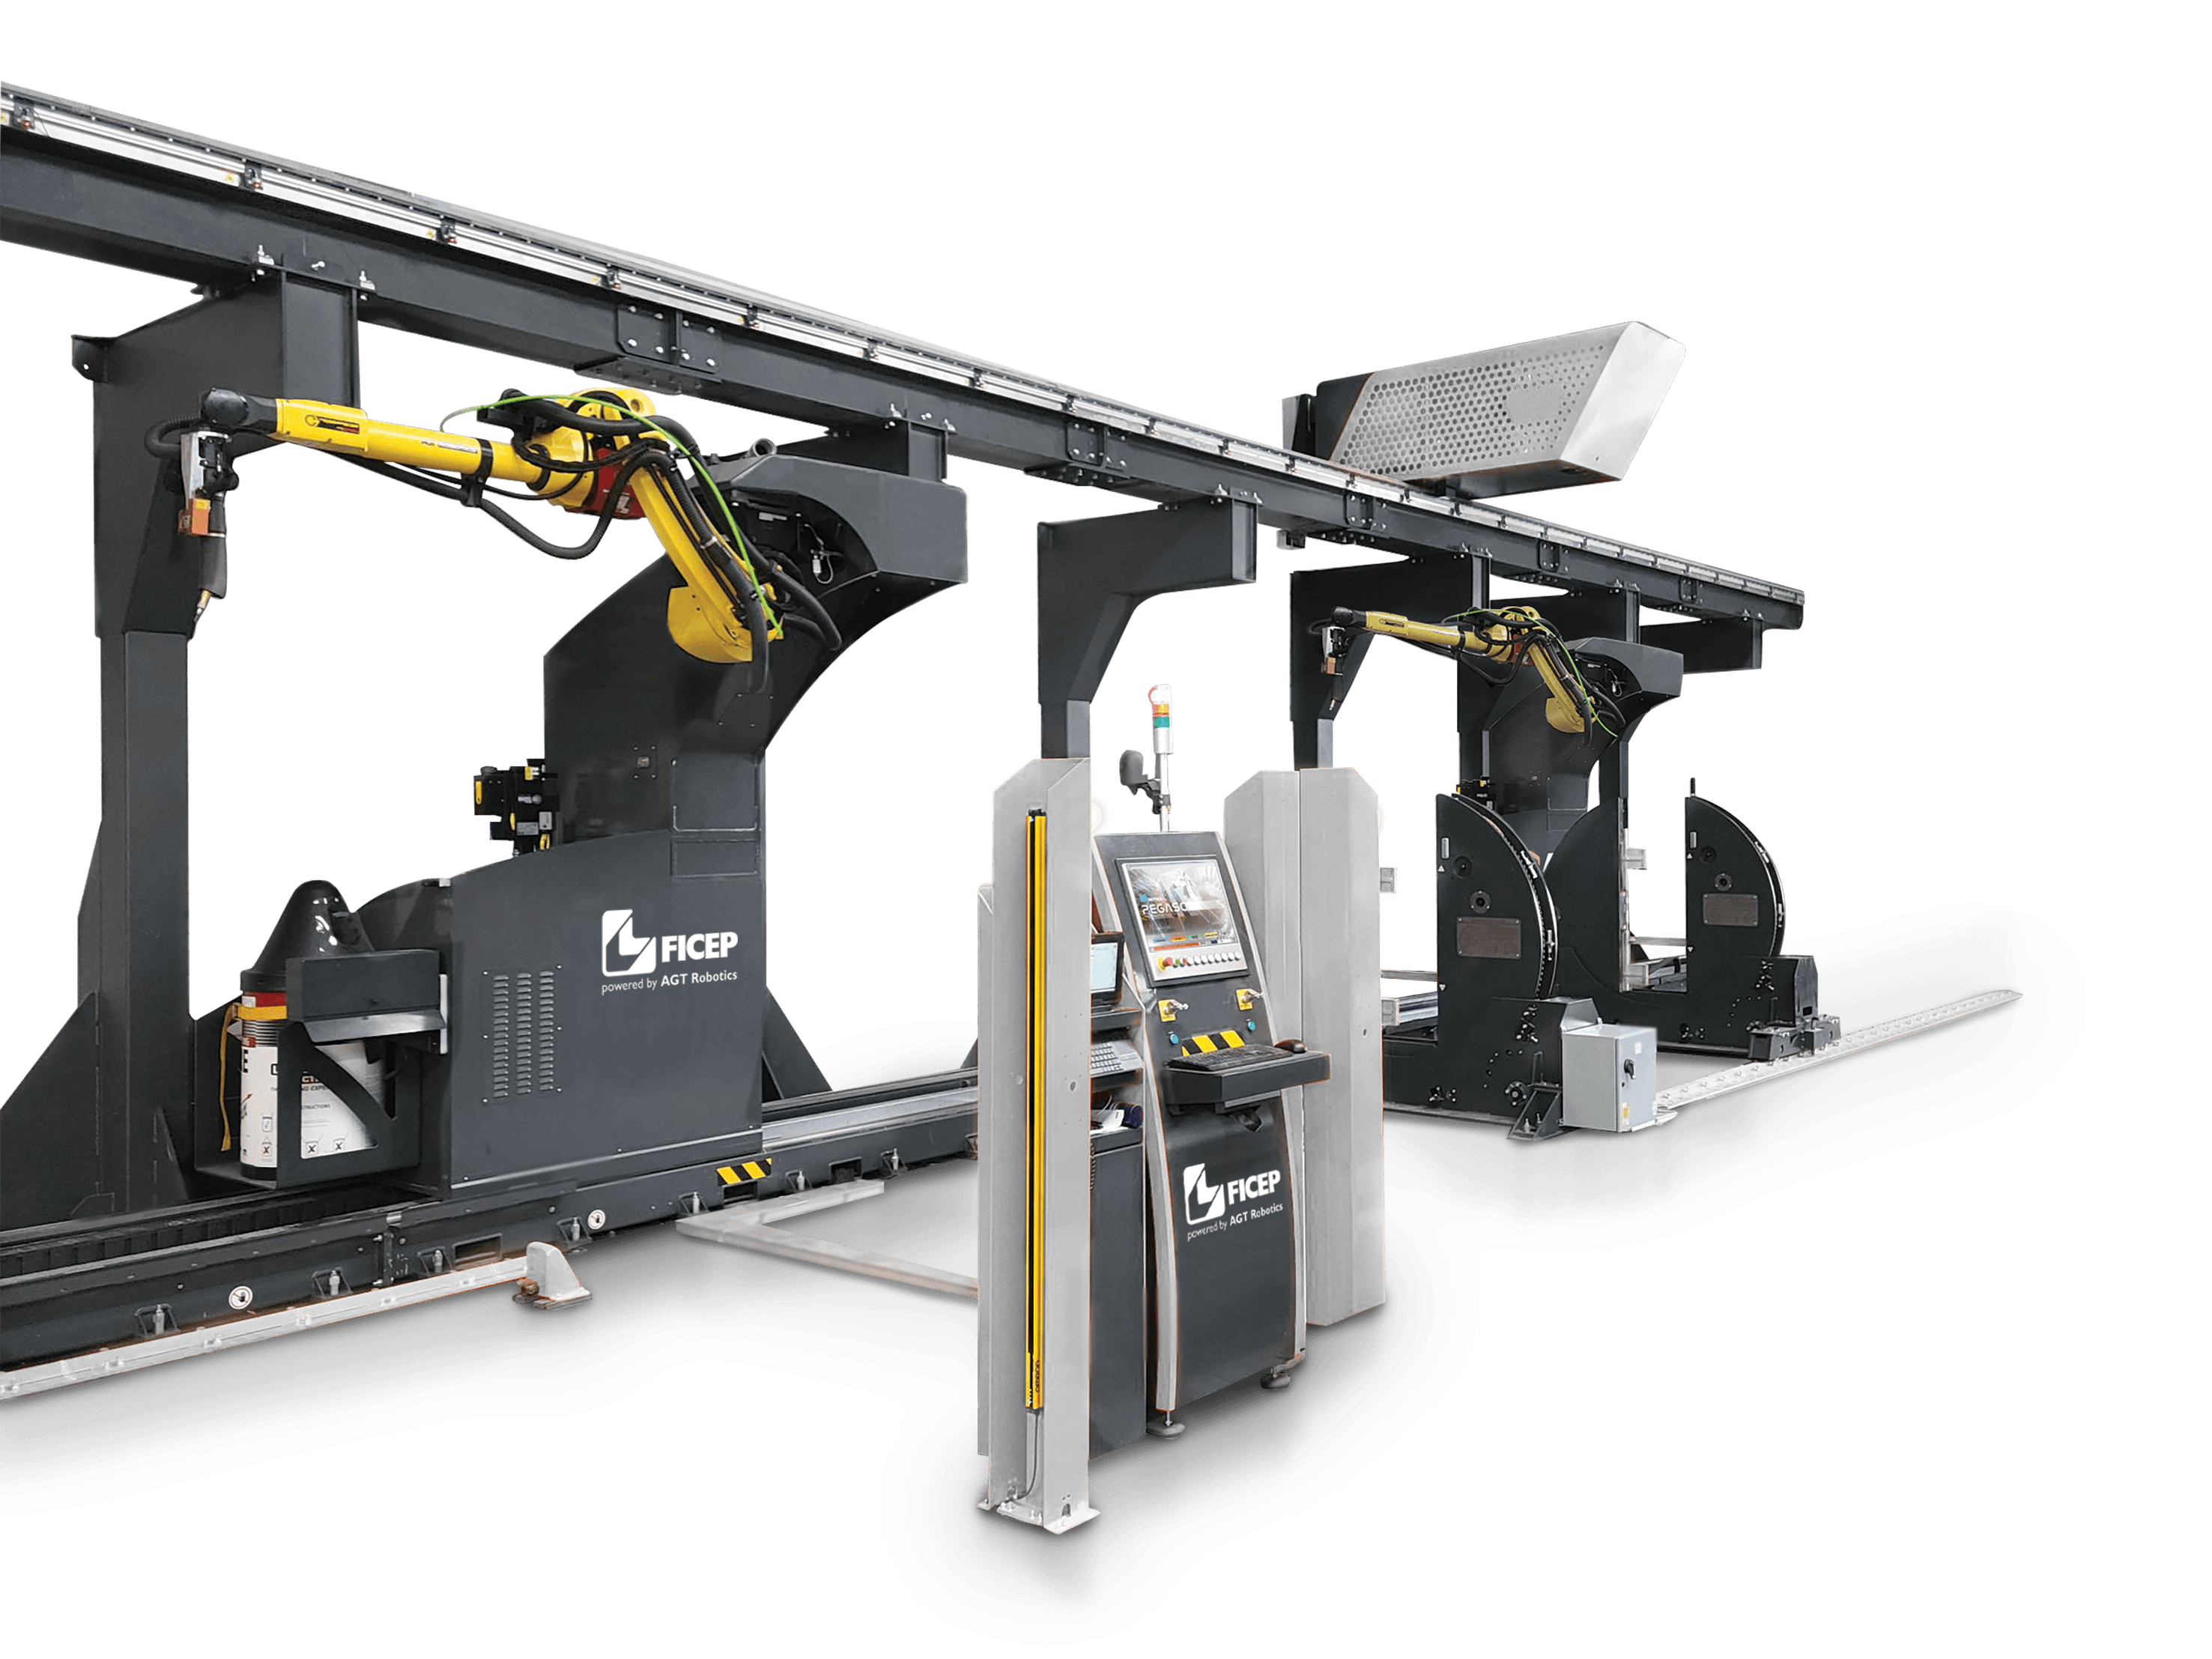 Product New robotic welding technology - Smart Futures image